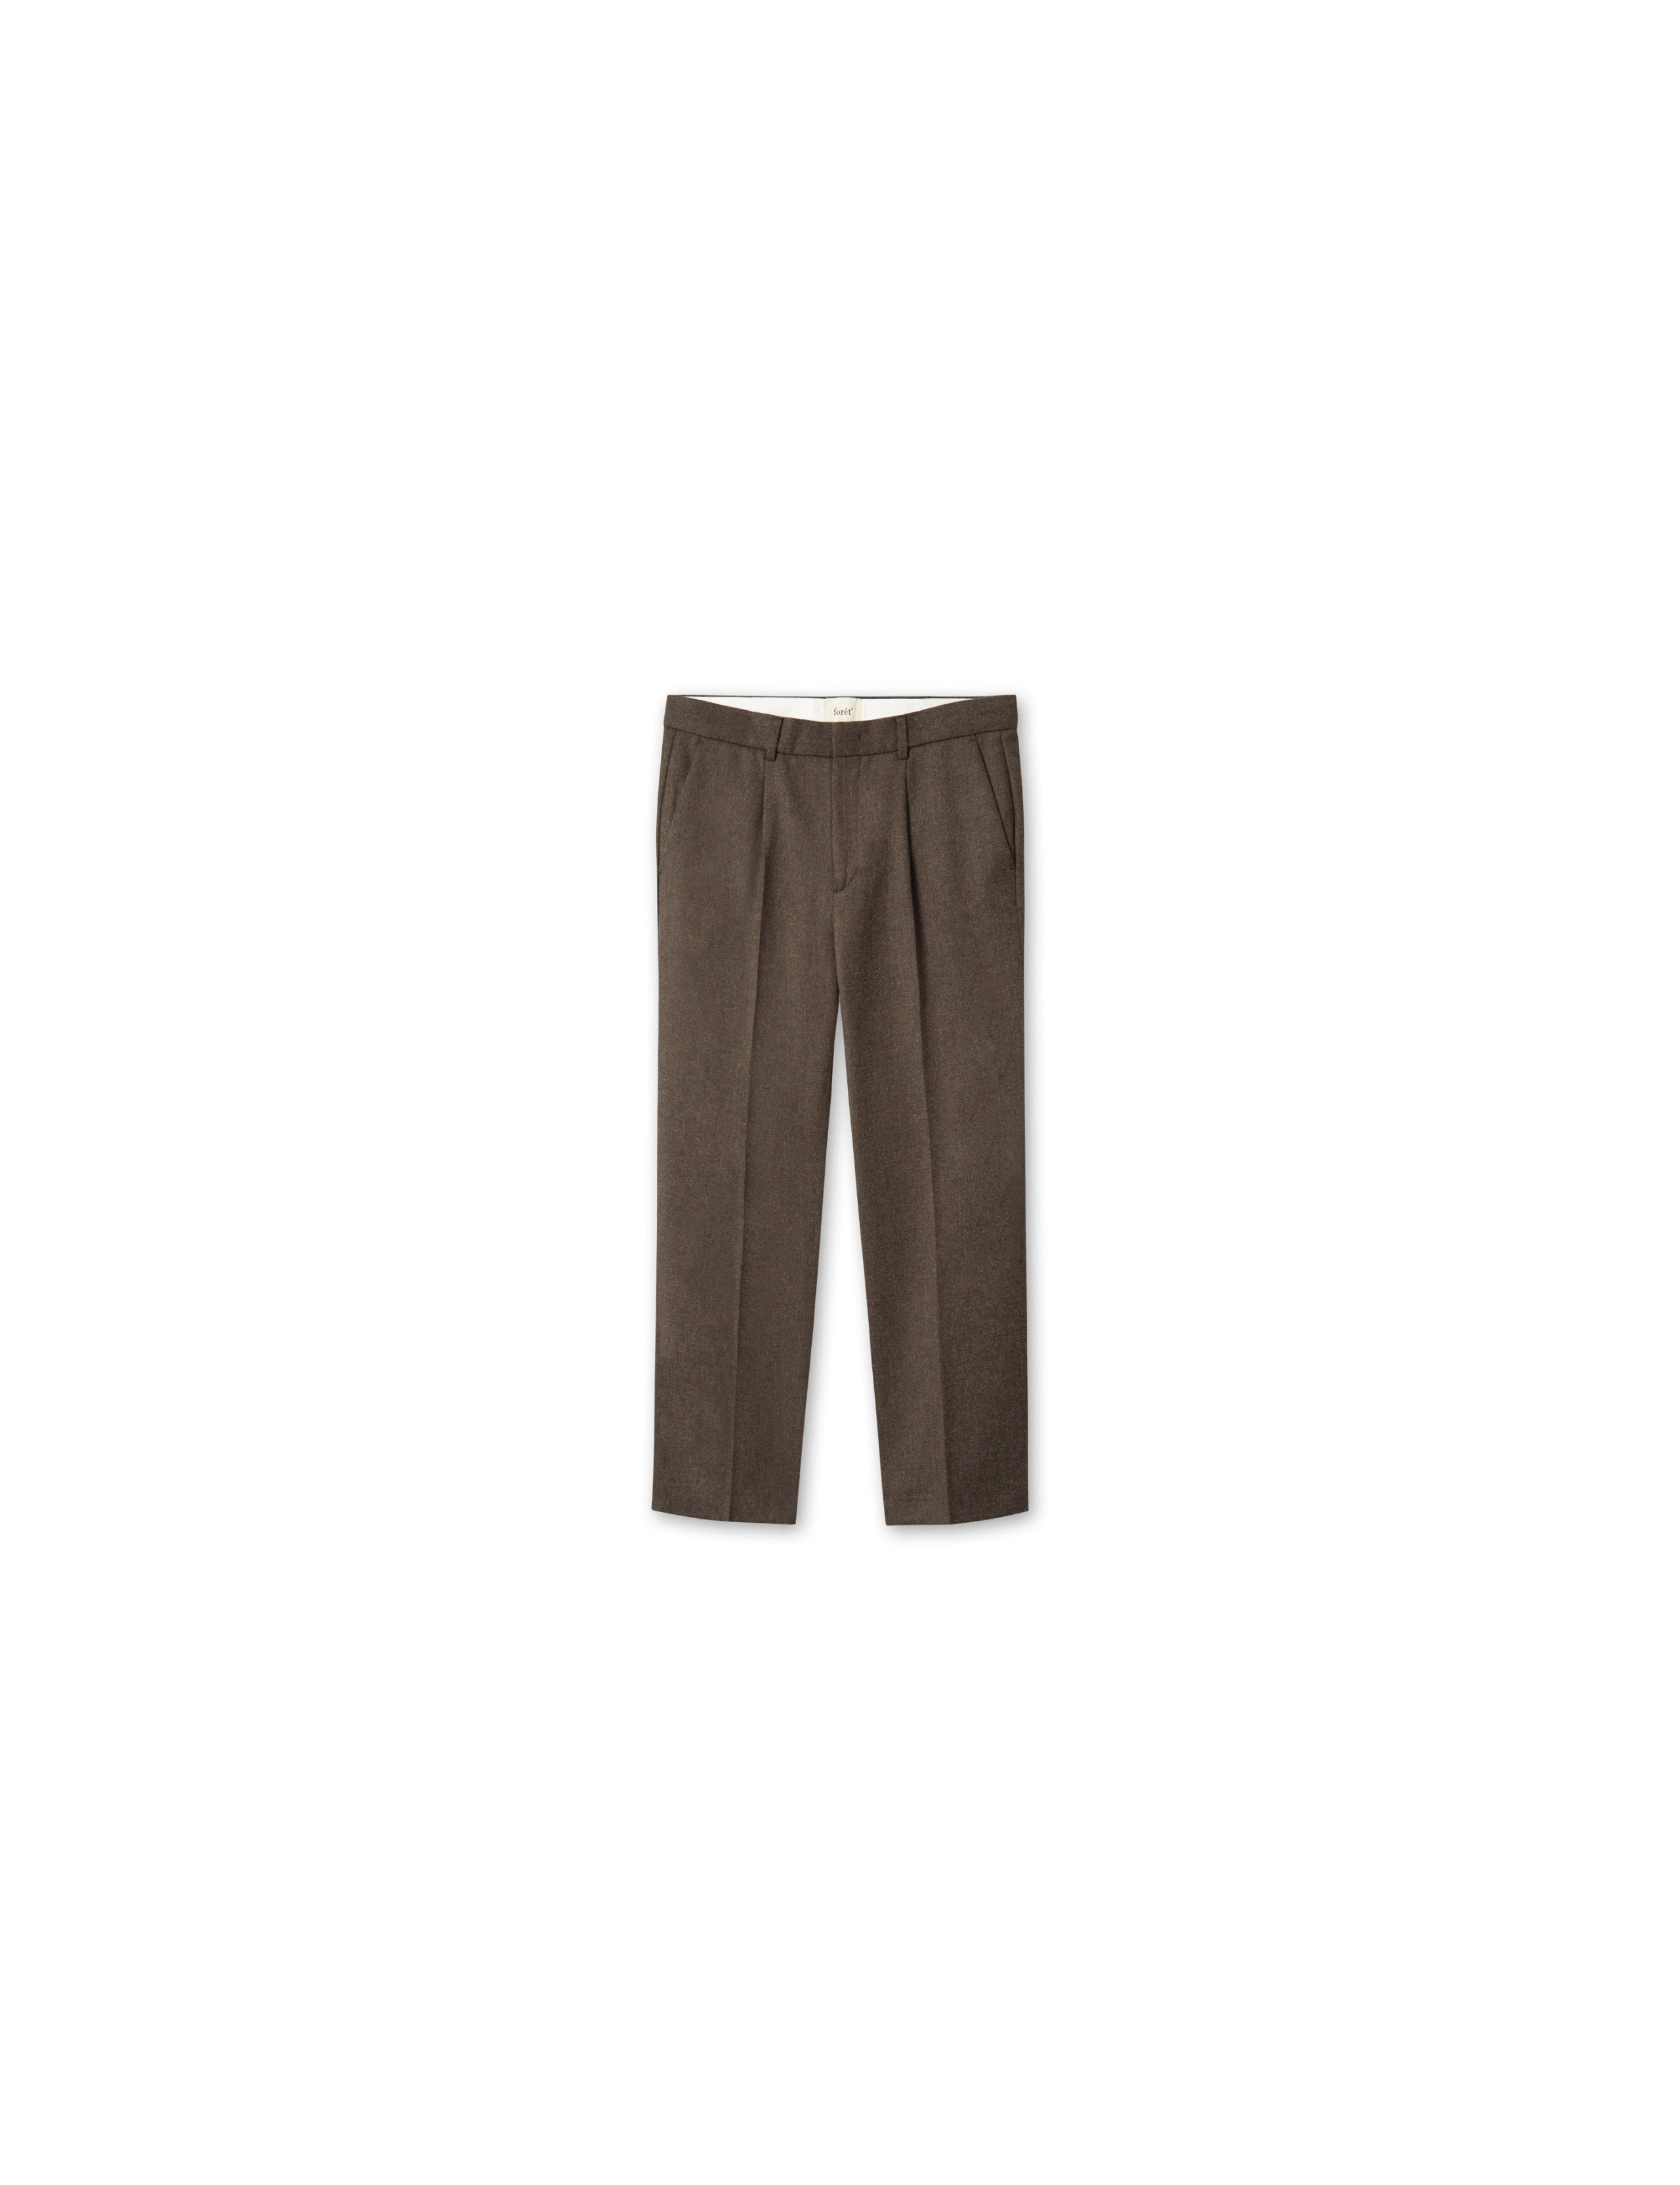 READ WOOL SUIT PANTS - TAUPE